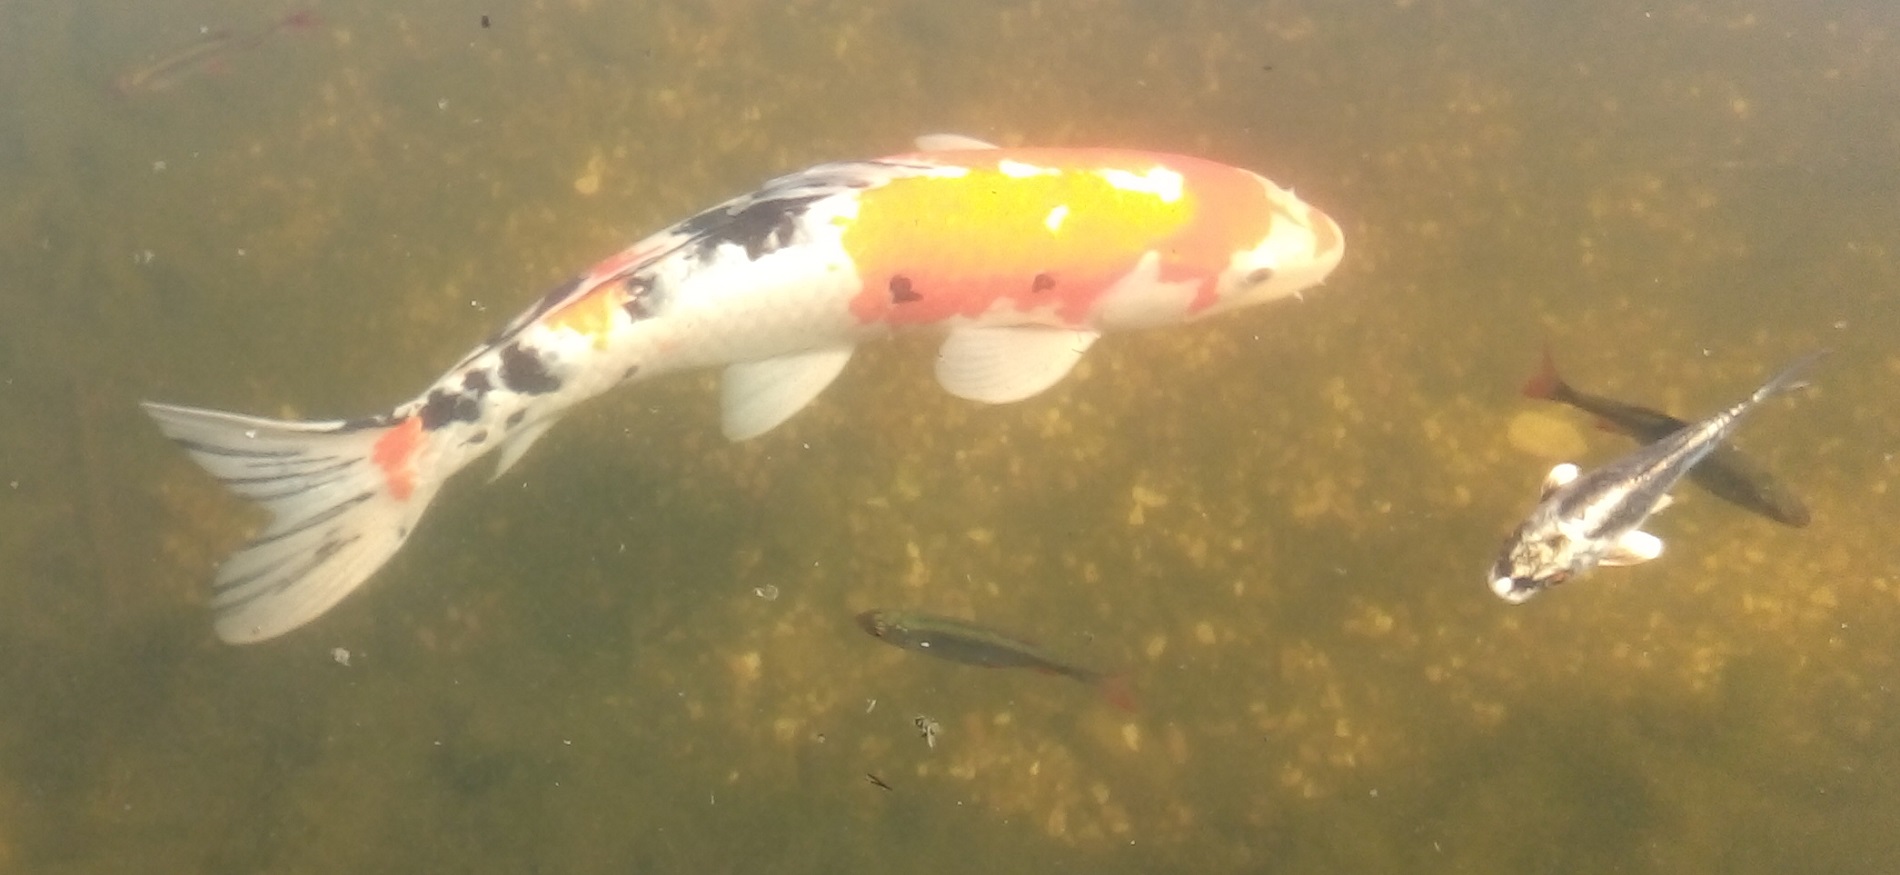 A white carp with black, red and yellow blotches swims in a pond with other fish